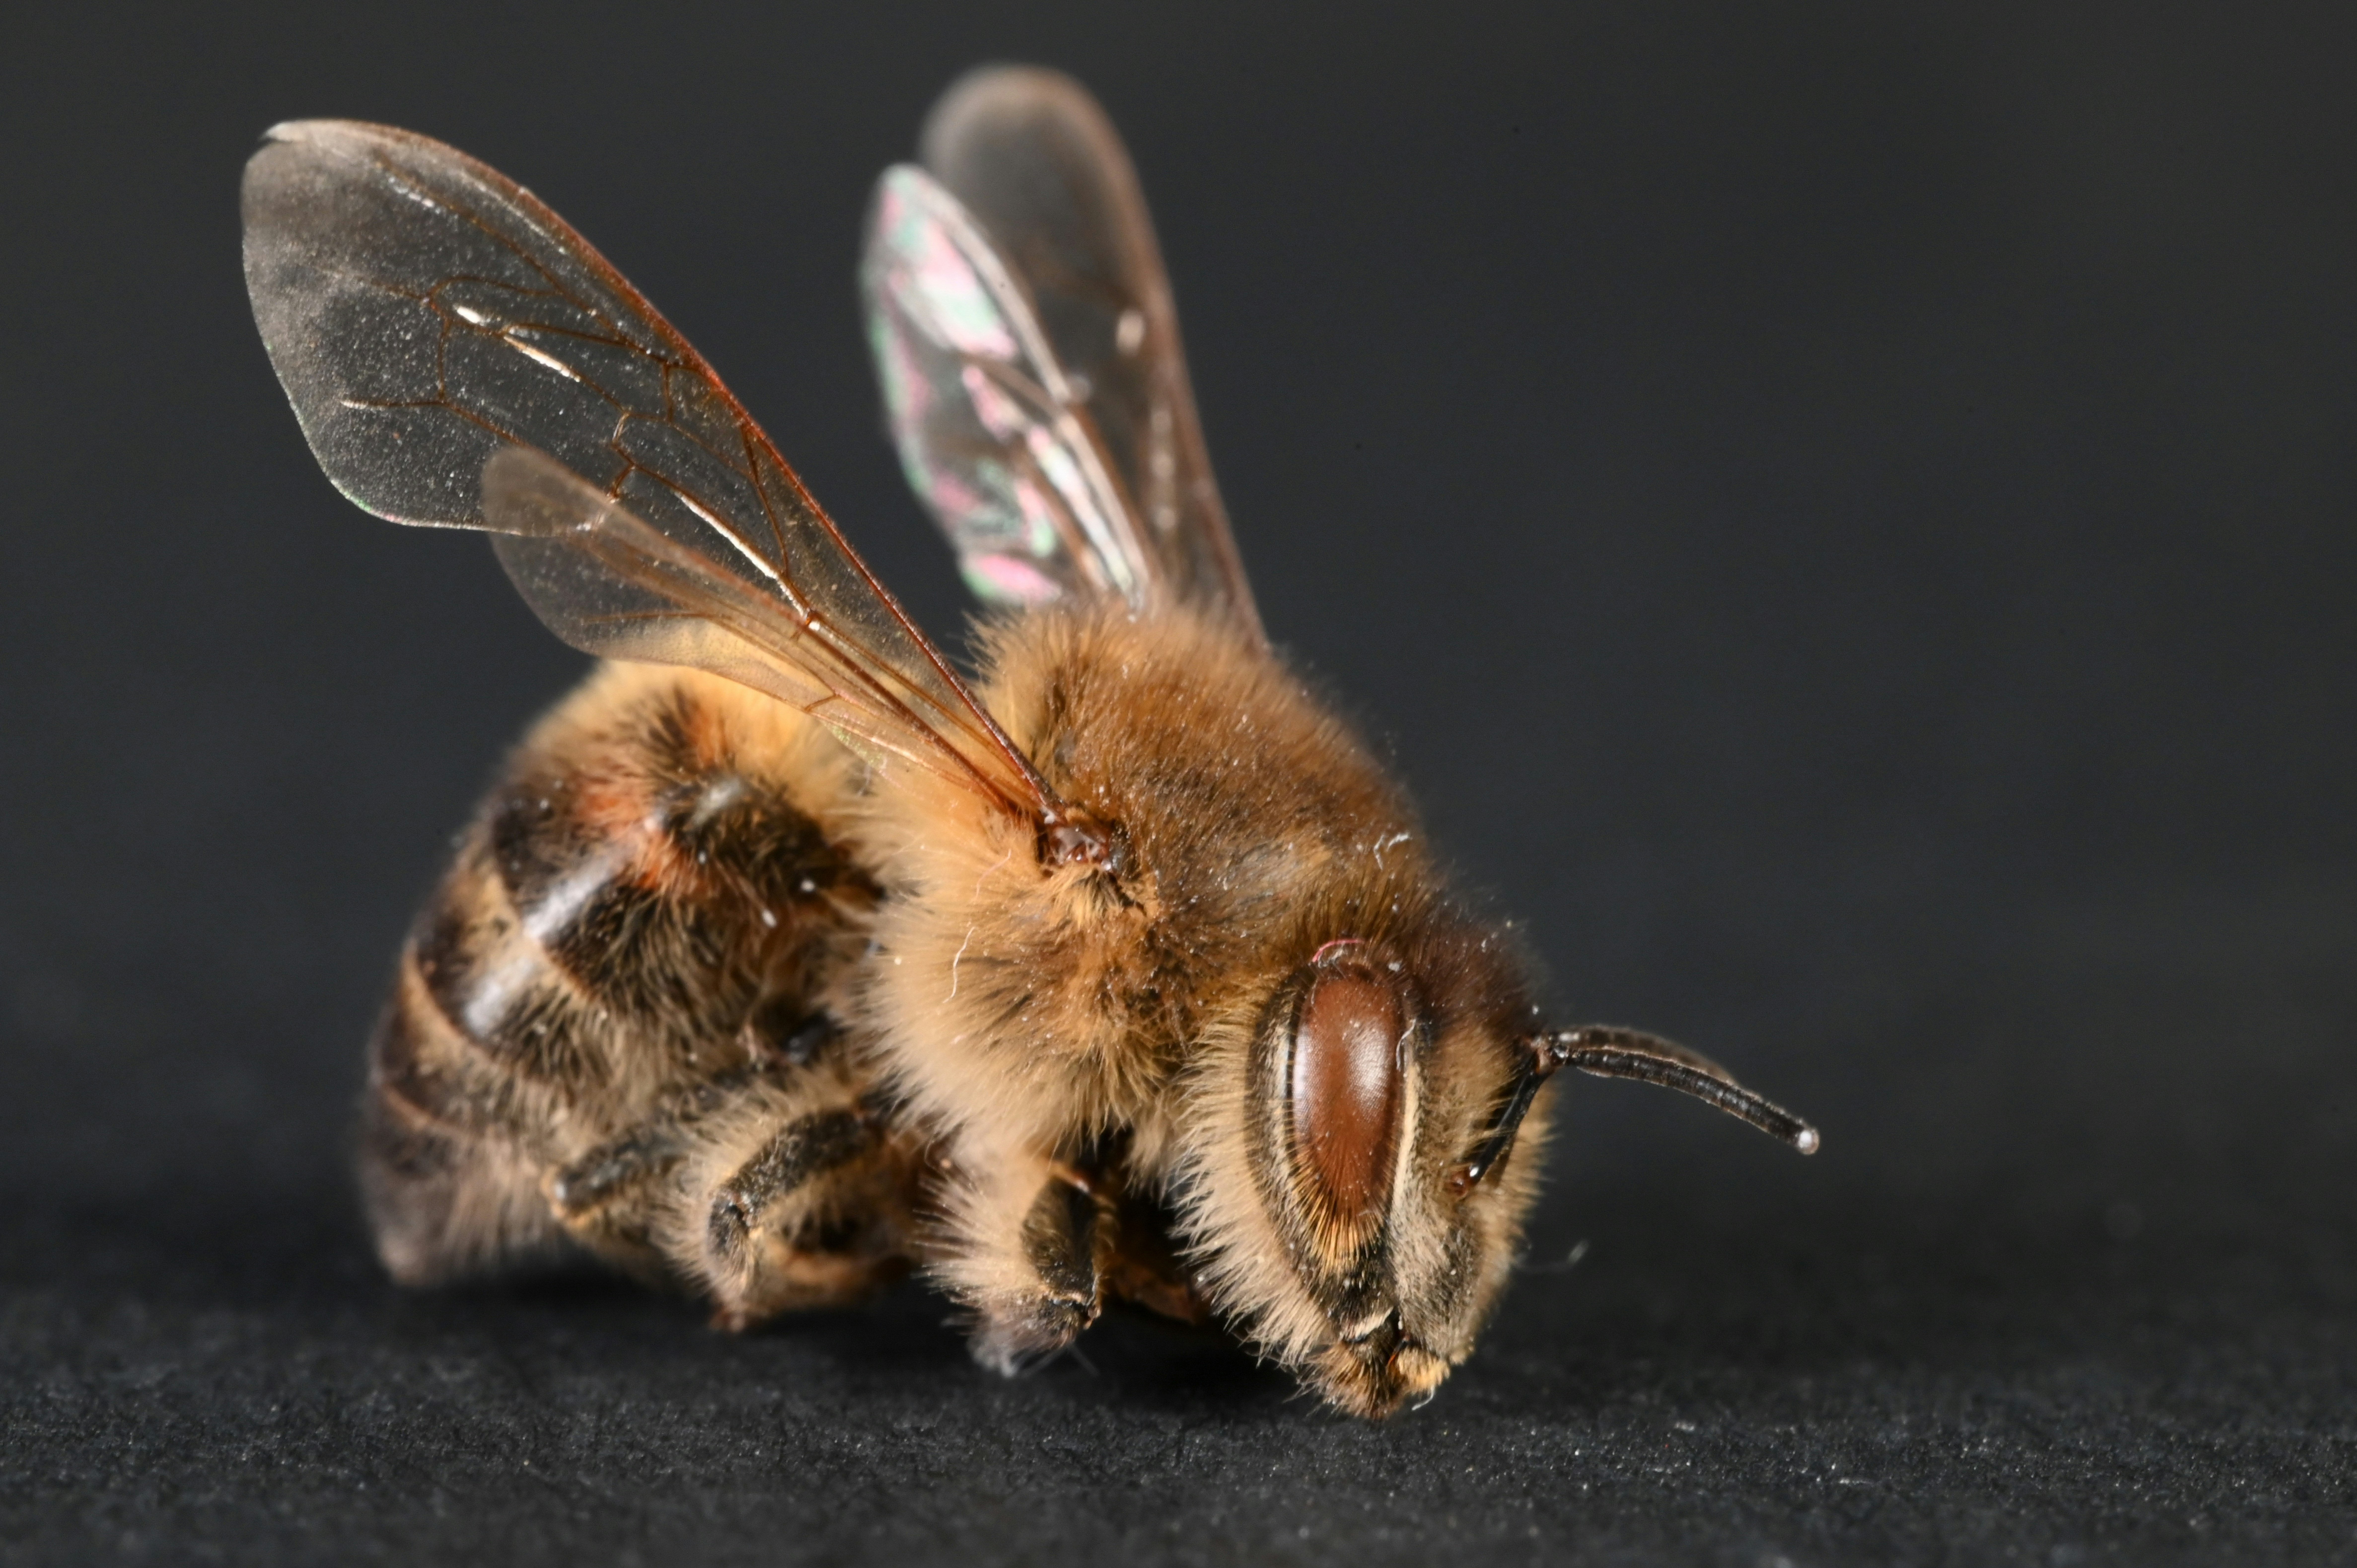 Common bee - close up